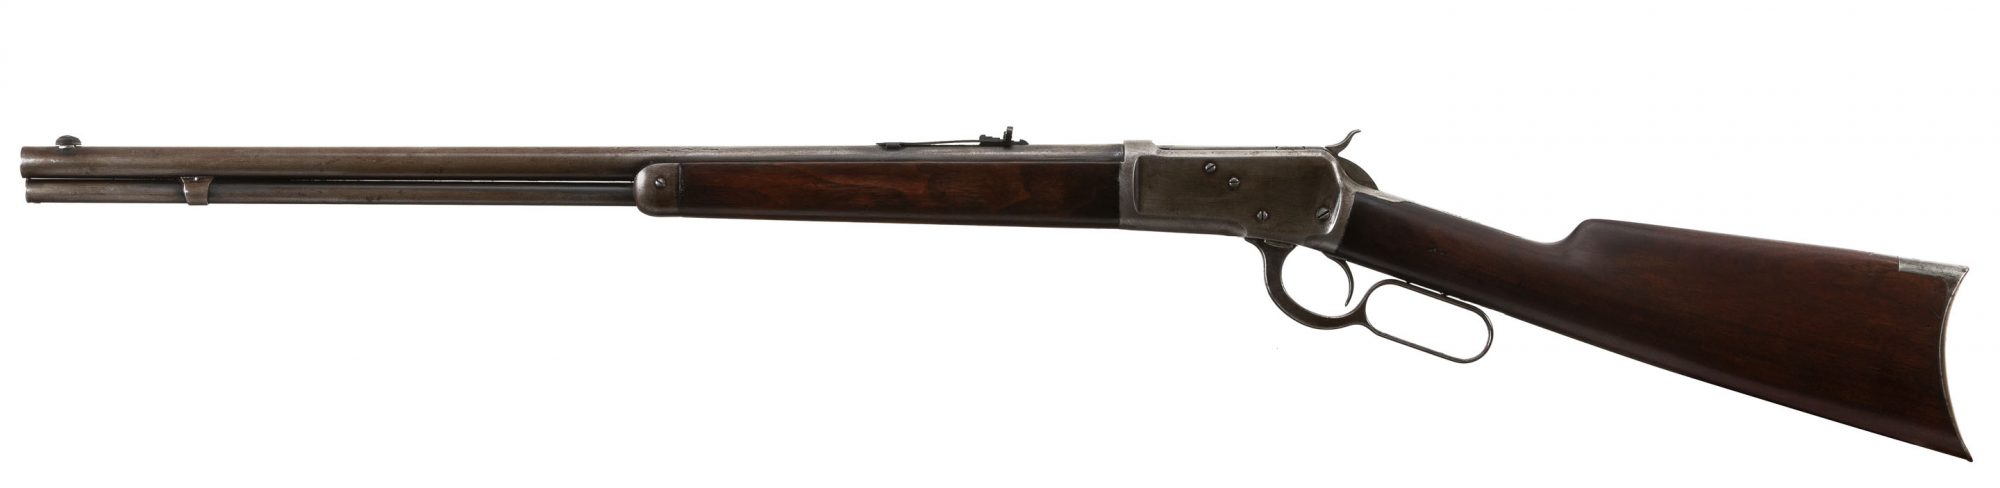 Photo of a Winchester 1892 from 1904, for sale by Turnbull Restoration of Bloomfield, NY